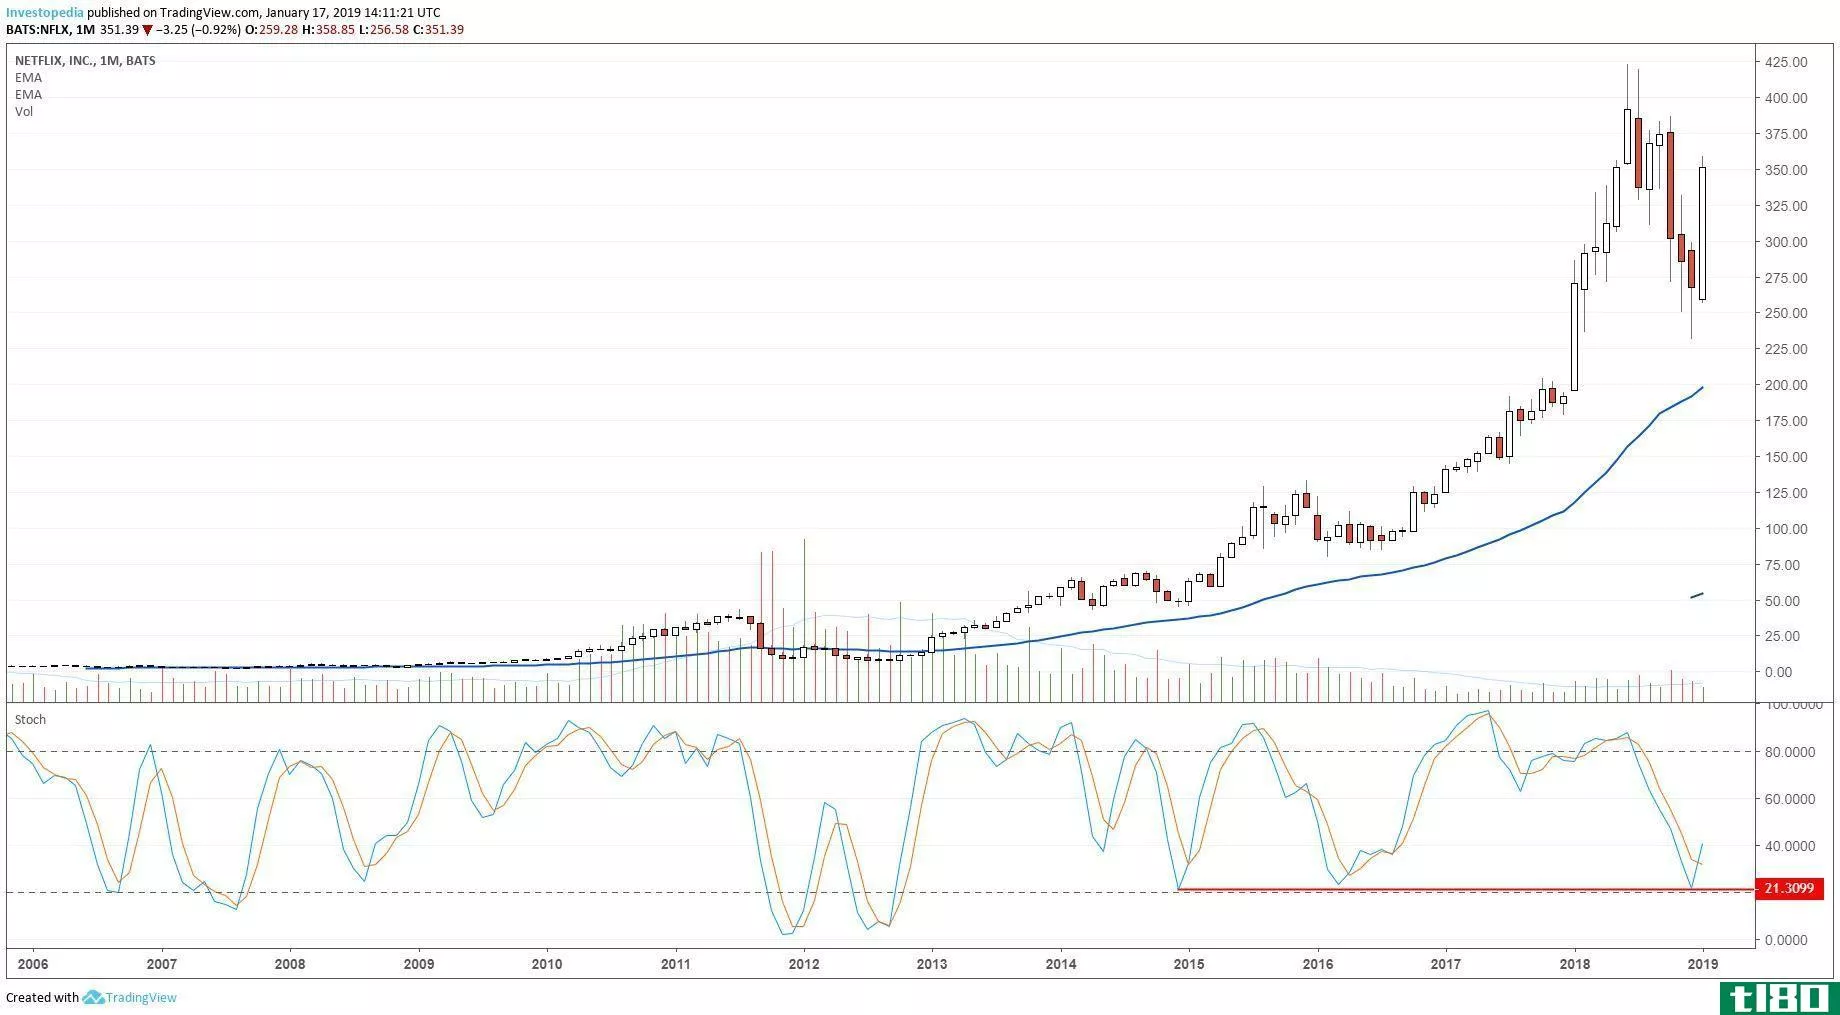 Long-term technical chart showing the share price performance of Netflix, Inc. (NFLX)